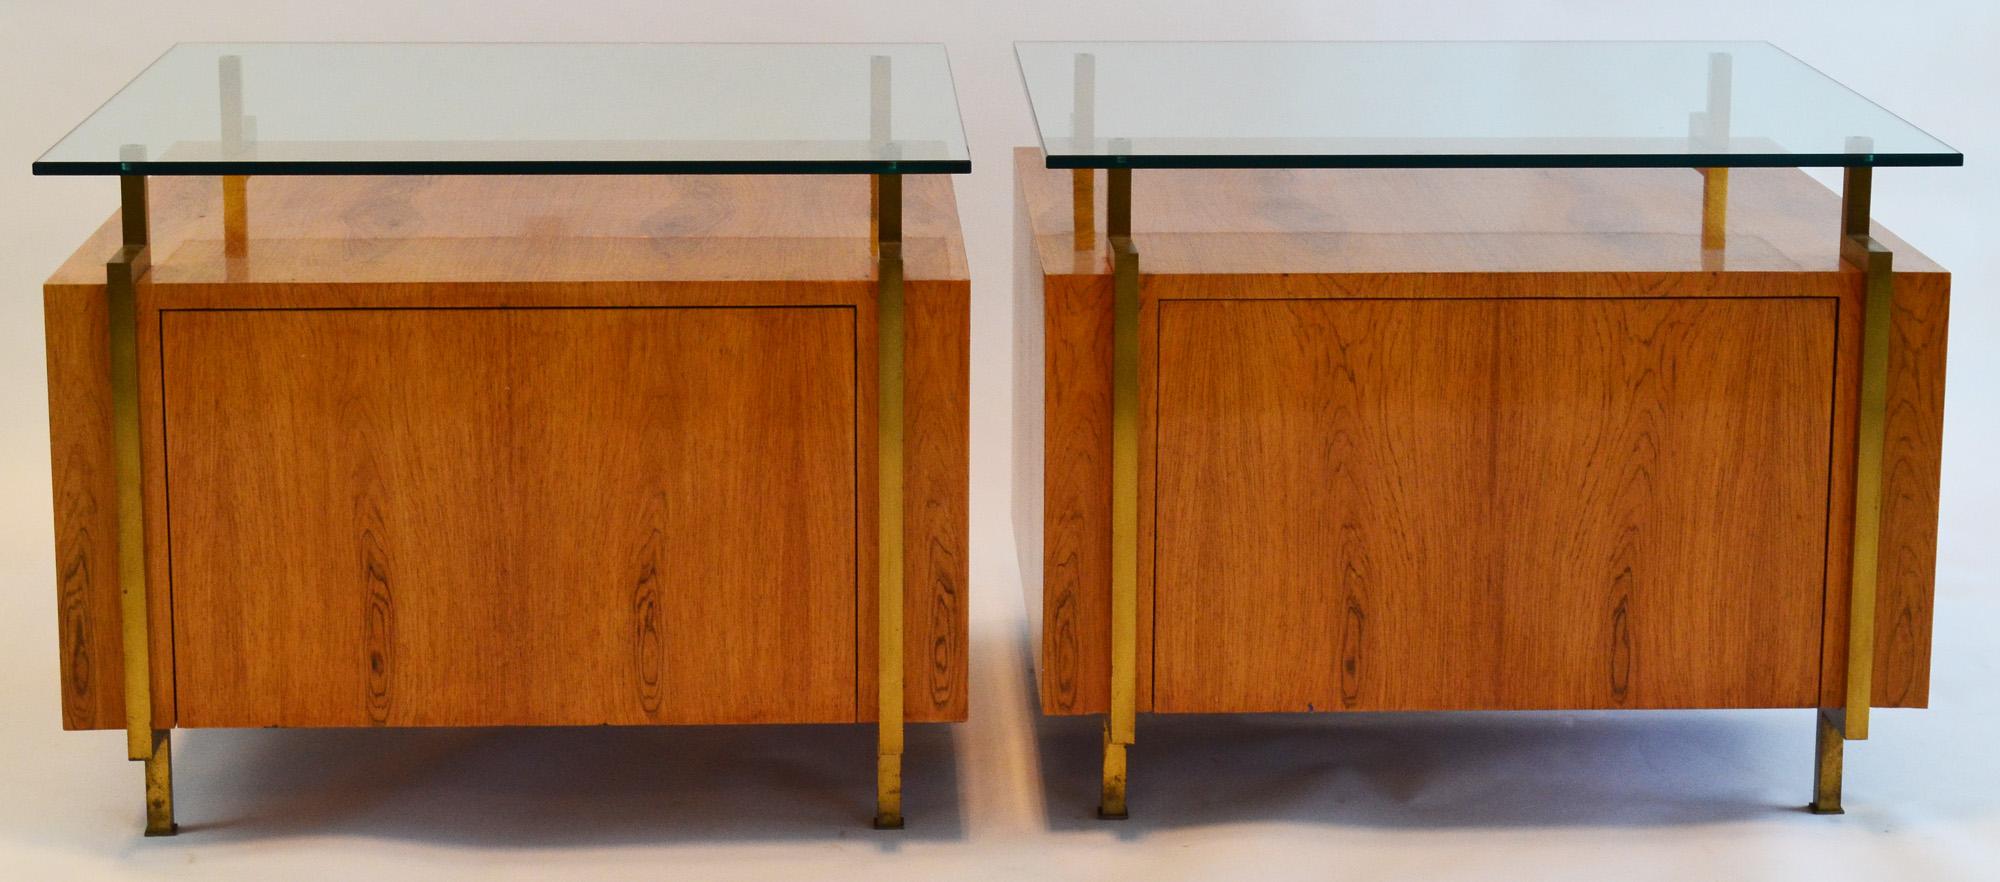 Pair of oversize cabinets or commodes or end tables Mid-Century Modern; single hinged door opens to large internal storage. Gorgeous exotic wood veneer with dimpled thick glass tops. Purchased in New York in the 1960s. Multi purpose cases can be